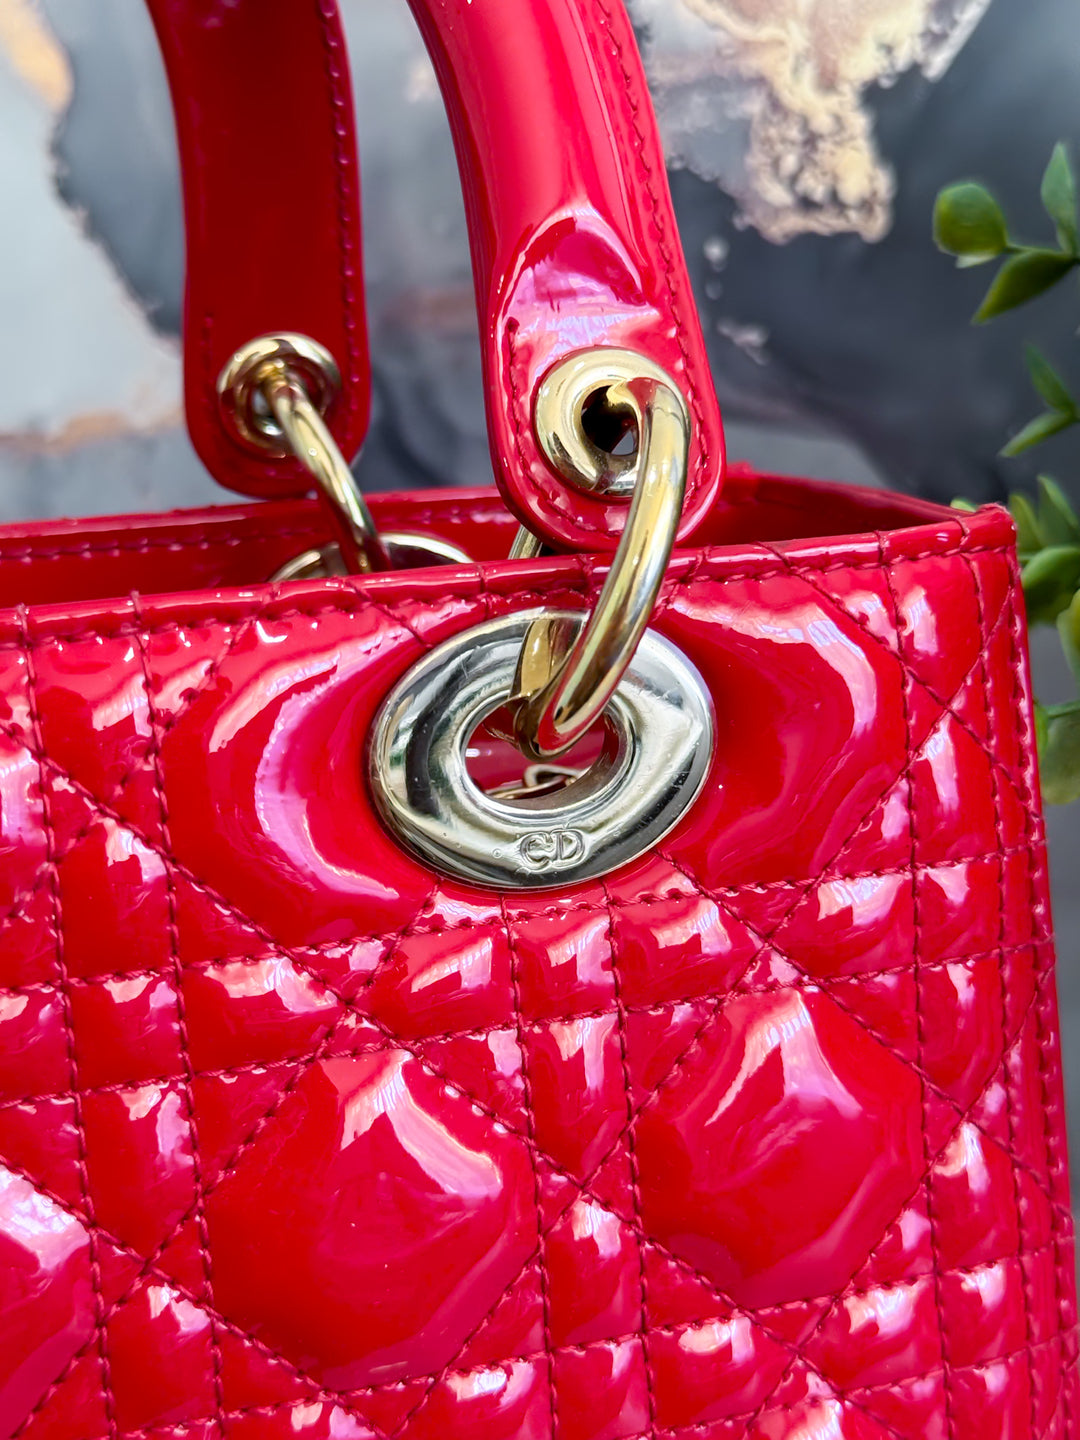 LADY DIOR MEDIUM RED PATENT LEATHER GOLD HARDWARE 2016